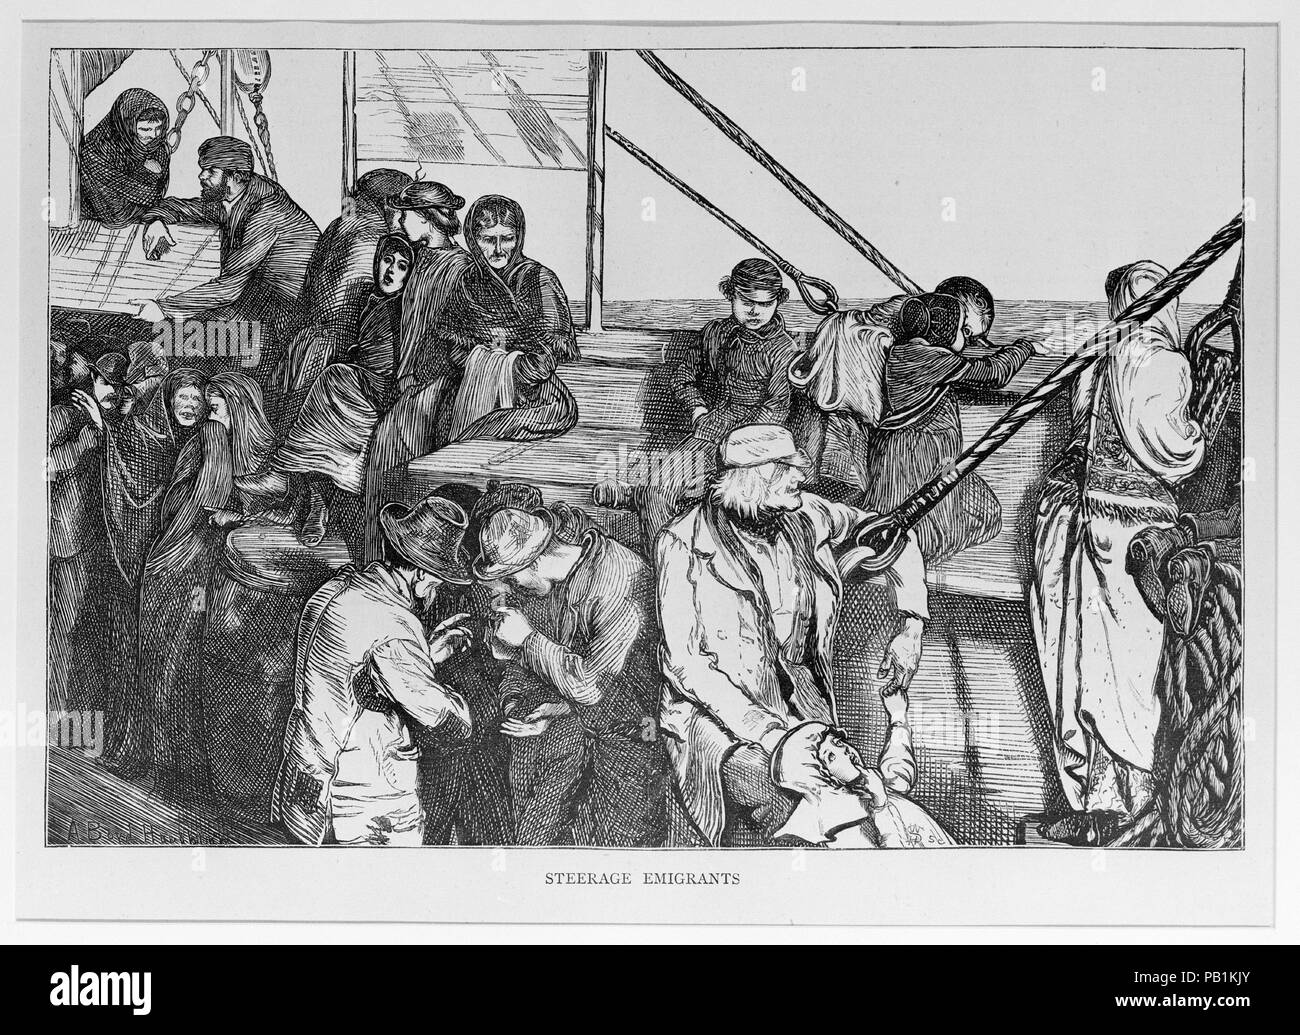 'Steerage Emigrants' (The Graphic). Artist: Arthur Boyd Houghton (British, Madras, India 1836-1875 London). Dimensions: image: 5 7/8 x 8 7/8 in. (15 x 22.5 cm)  sheet: 8 1/16 x 11 1/4 in. (20.5 x 28.6 cm). Date: March 19, 1870. Museum: Metropolitan Museum of Art, New York, USA. Stock Photo